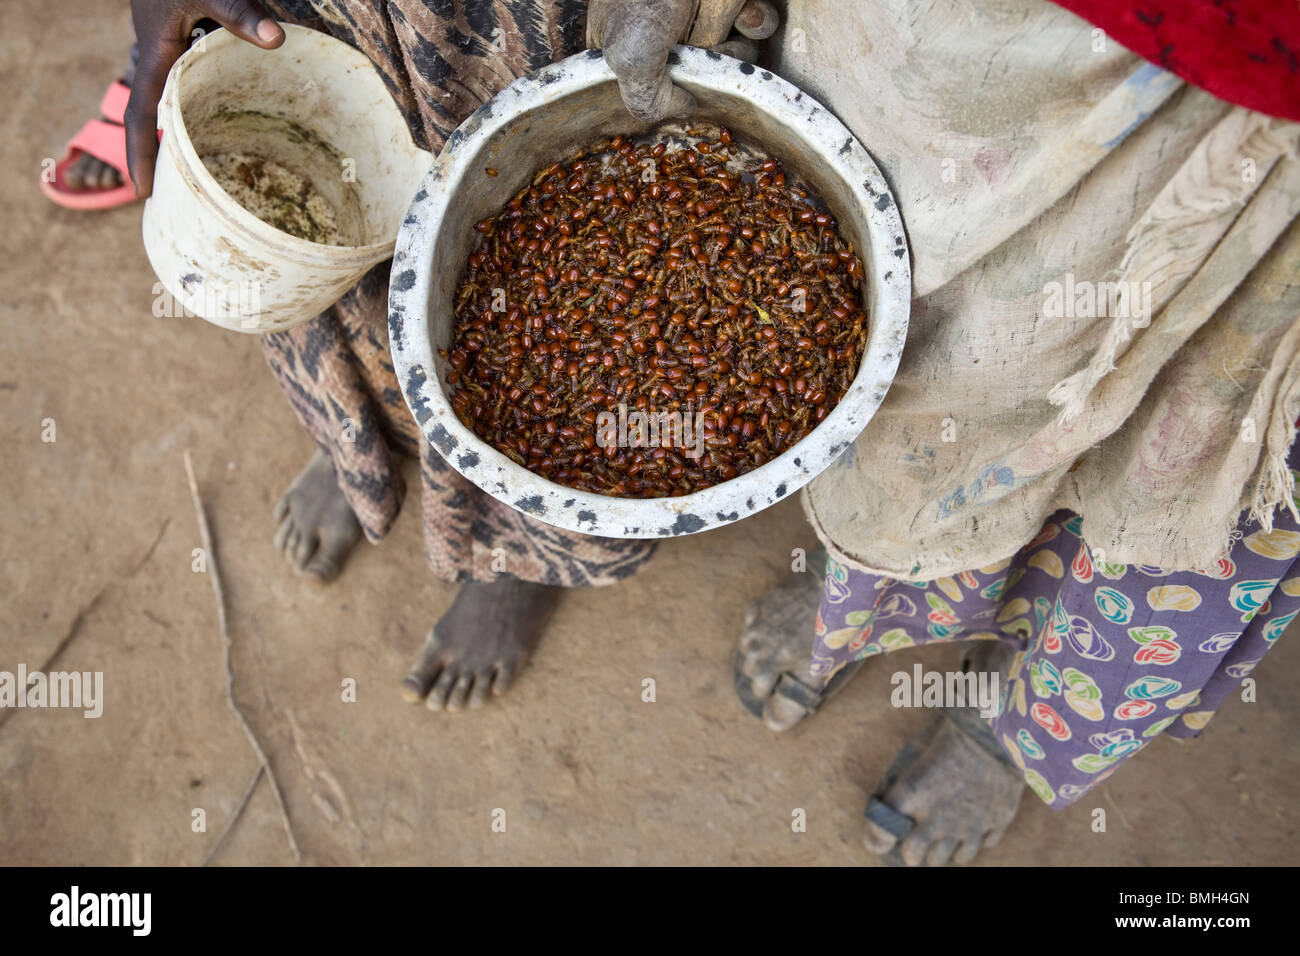 Termites gathered in a saucepan for a family's evening meal in Northern Uganda. Stock Photo